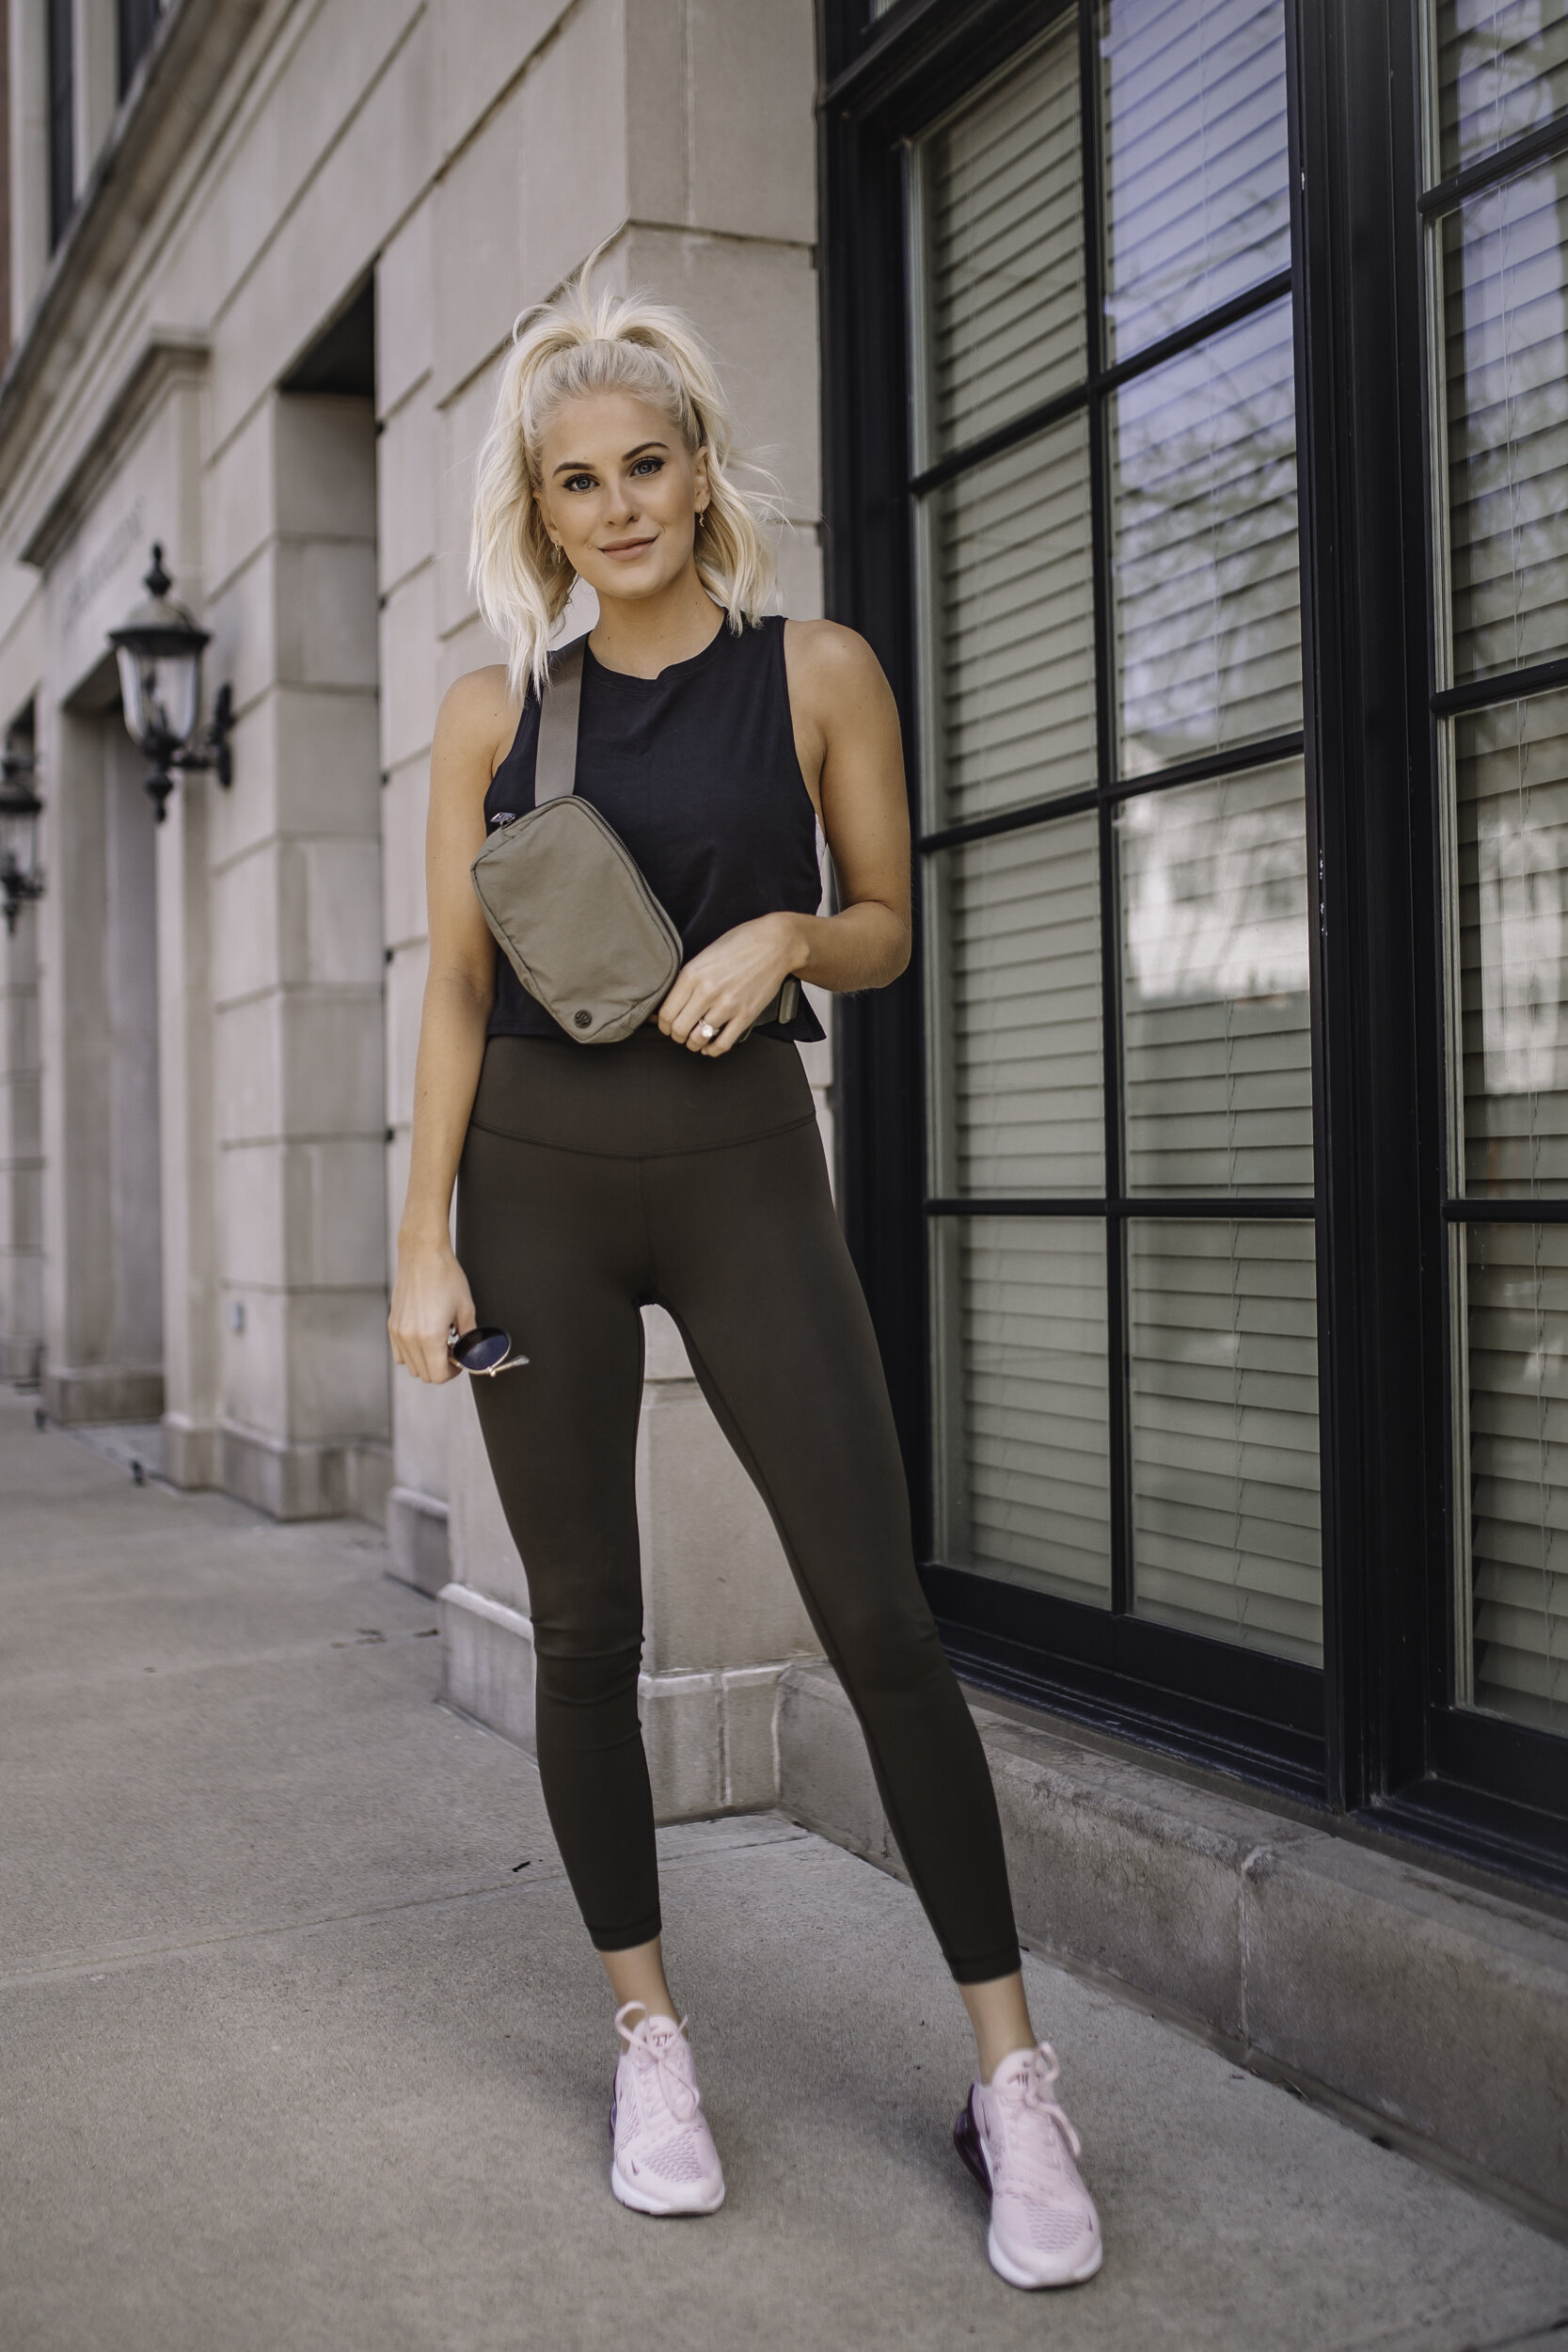 lululemon Everlux review + 10 motivational workout songs 